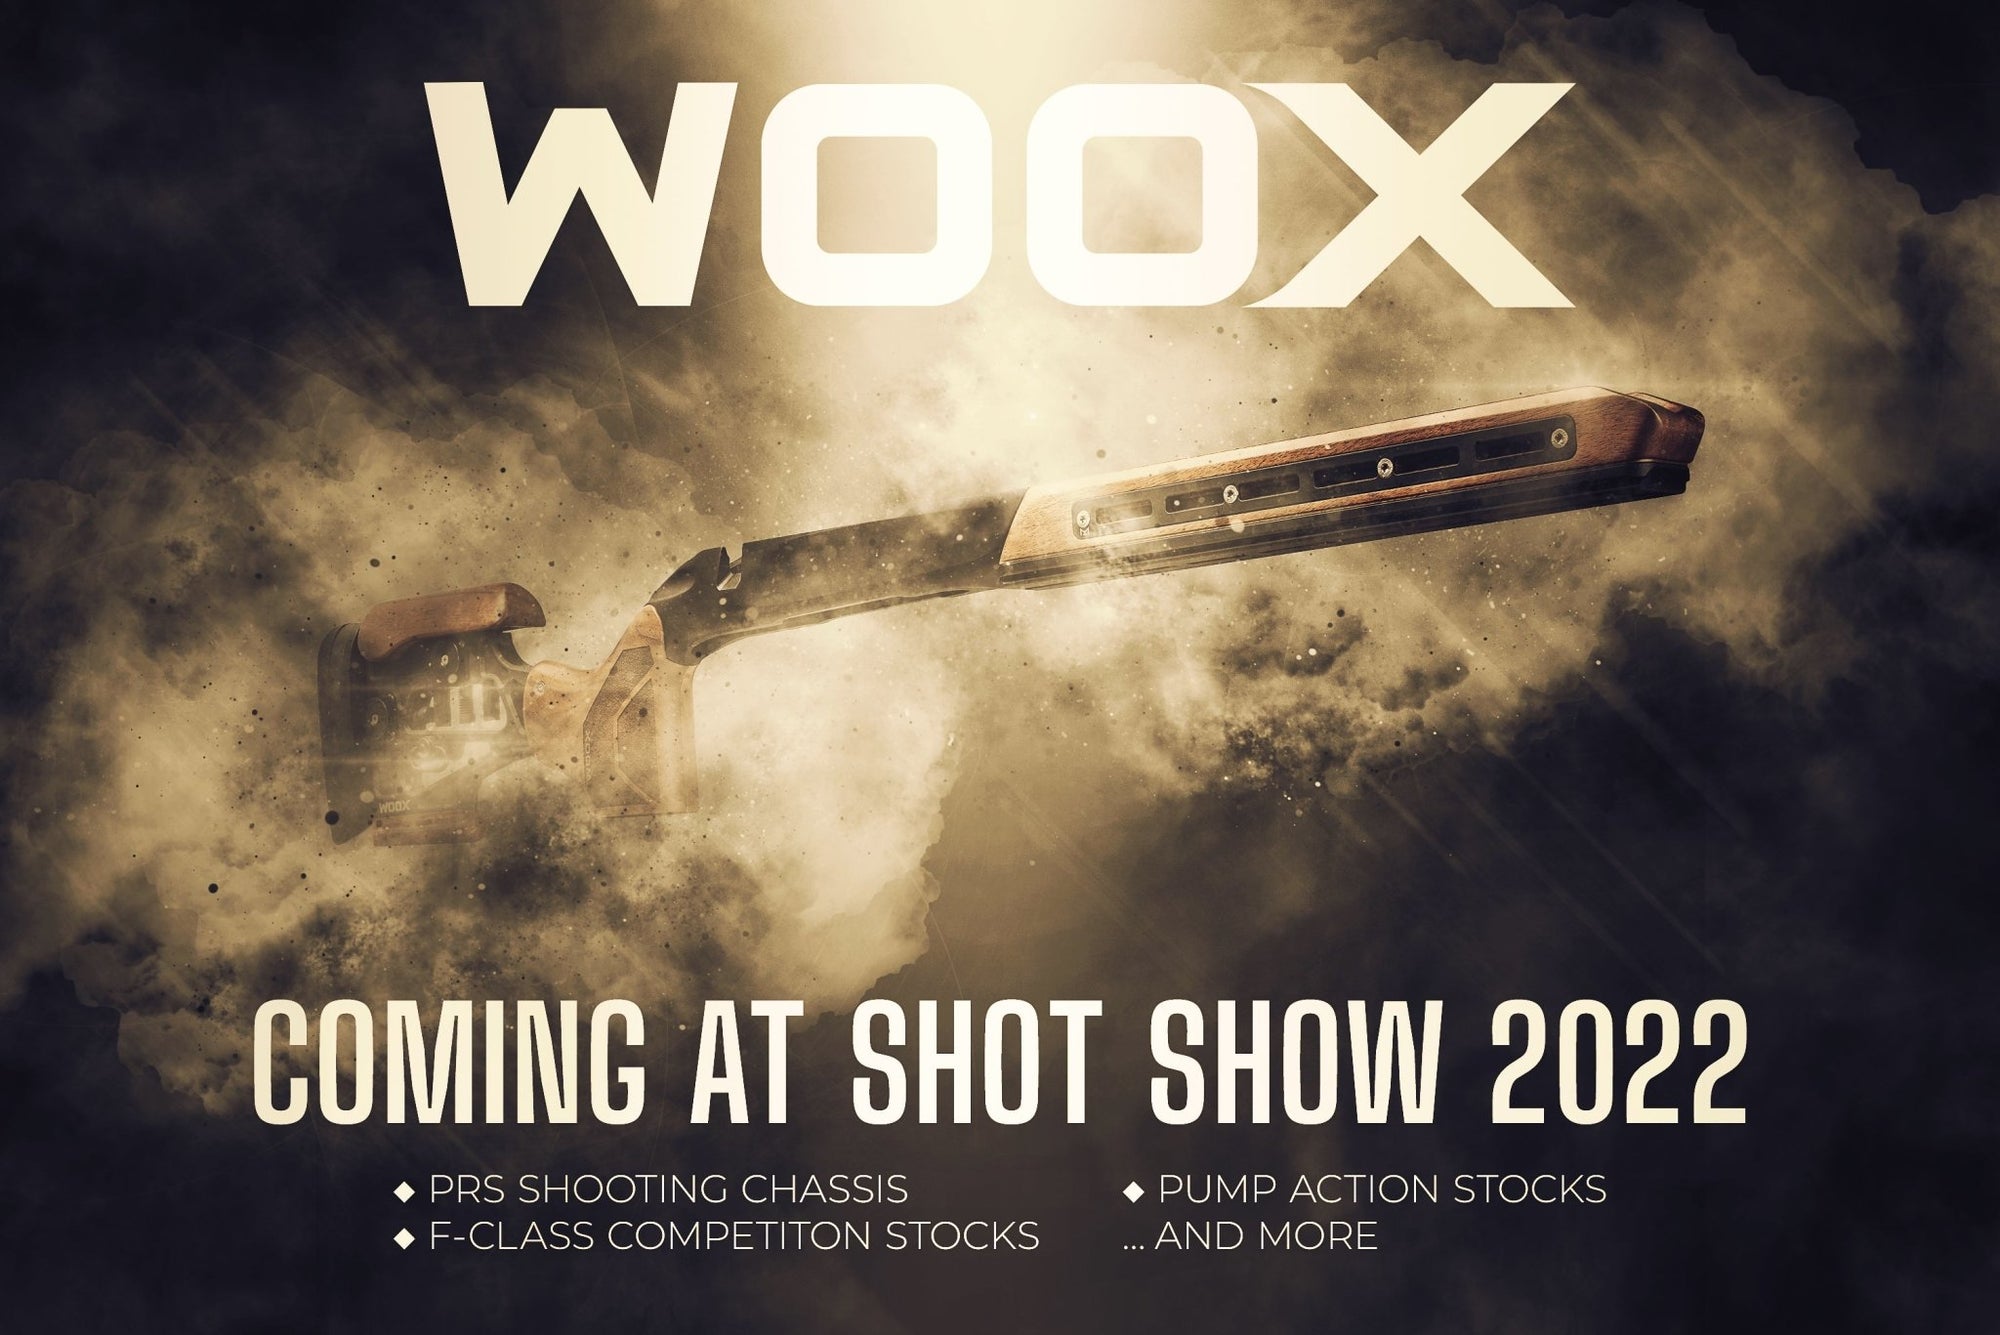 WOOX Launching New Products at SHOT Show - WOOX